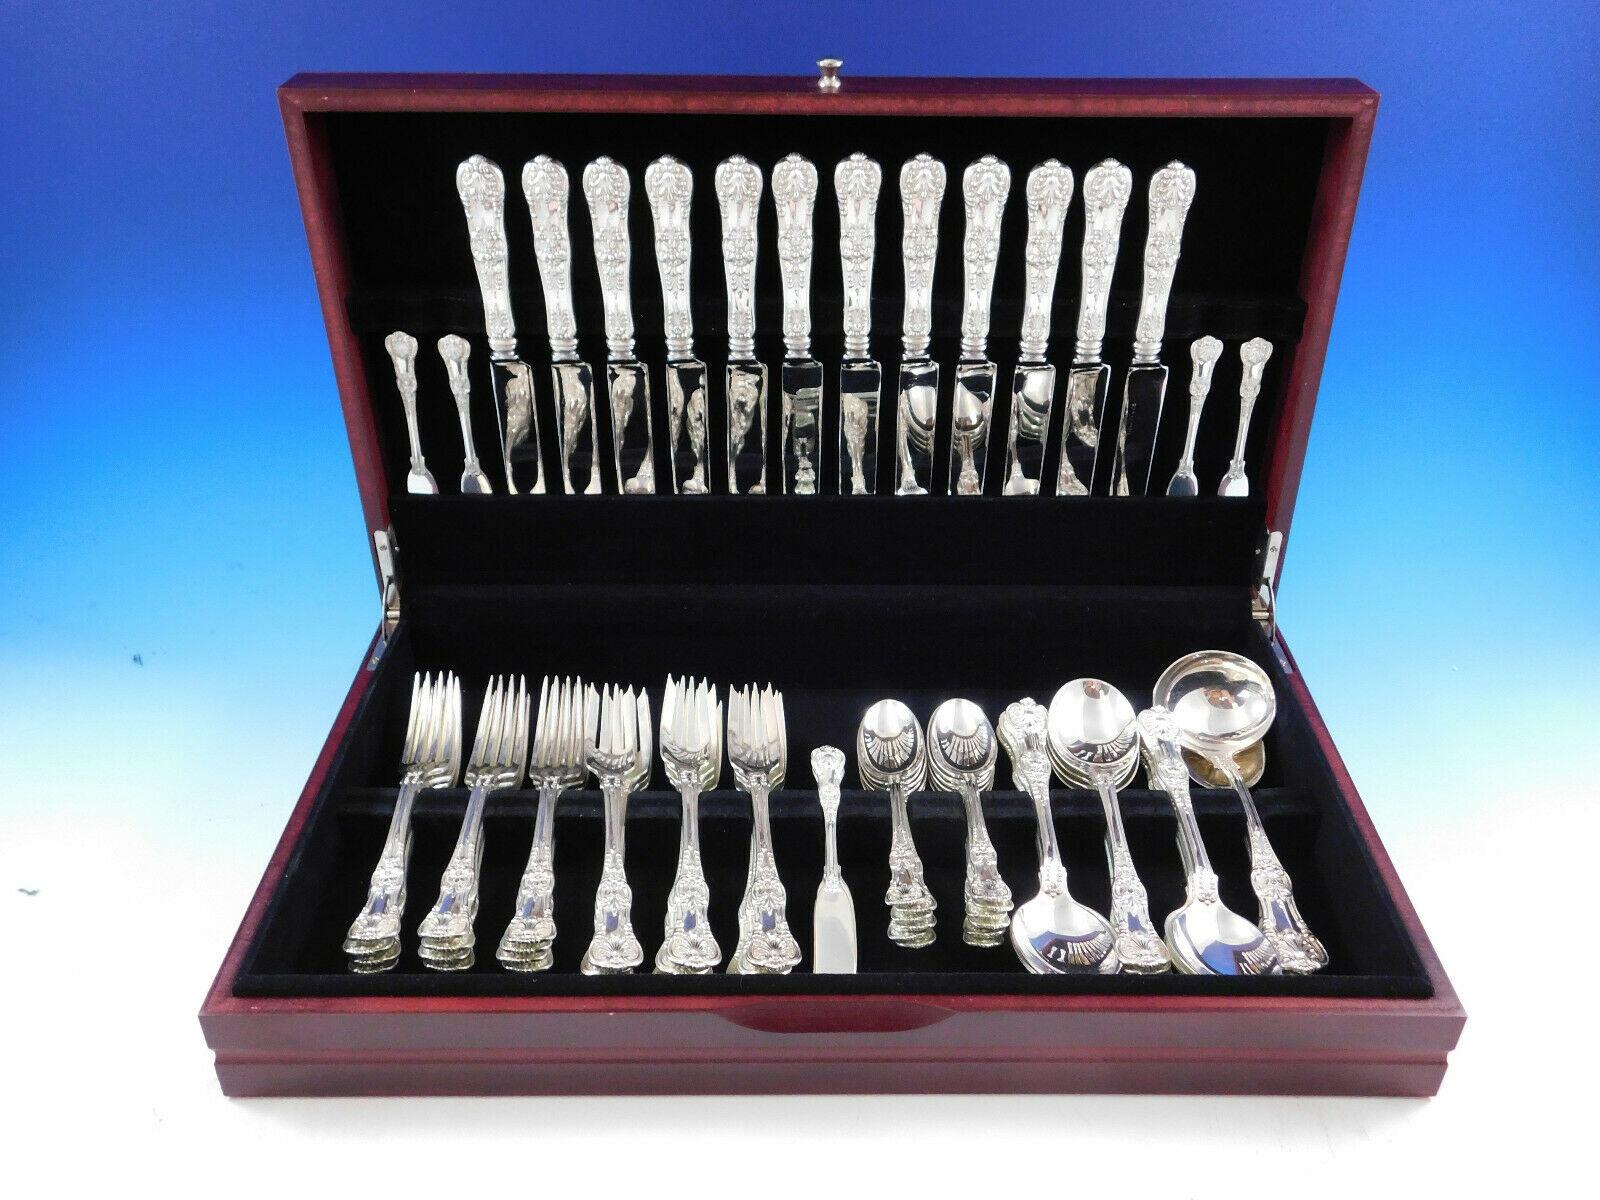 English King (c. 1885)

Patterns similar to our English King were first used in France and England late in the eighteenth century and have remained among the most popular styles for>flatware today, in both Europe and America. Tiffany & Co. first